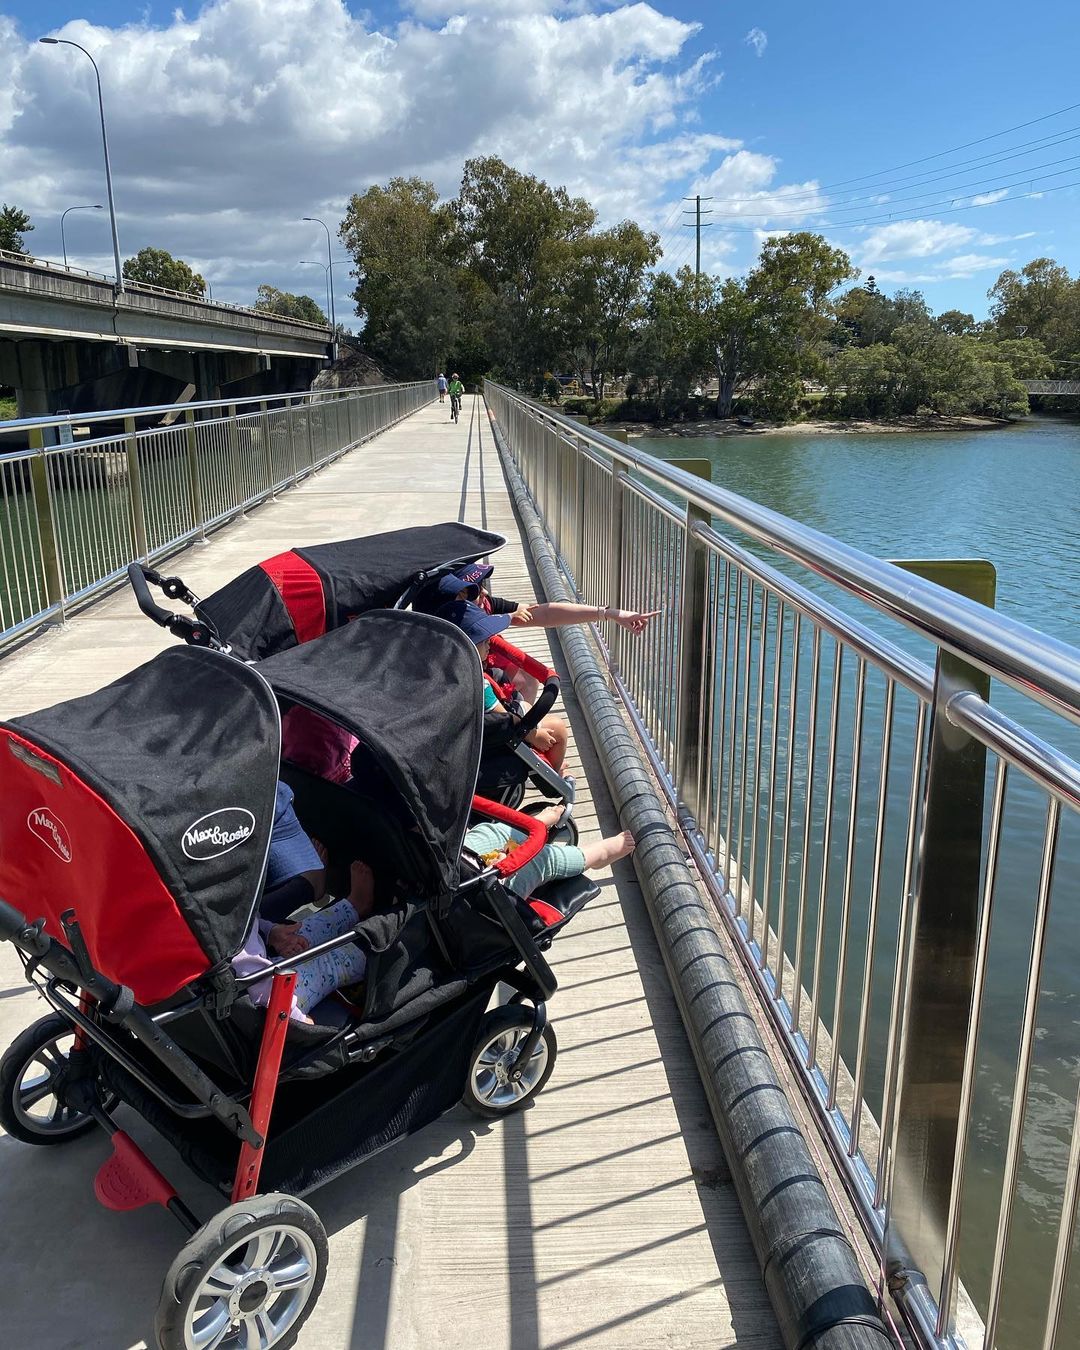 This morning one of the children showed an interest in birds as when they arrived to kindy they saw some birds eating on the driveway. 🦢🦜🕊🦅

We decided to take a walk in our 4-seater prams to the creek to see if we could find any birds 🦜🦆🦚

The children and educators walked along Currumbin Creek Road, crossing at the traffic lights 🚦 and made their way over to the pedestrian bridge. Here the children were able to see the beautiful view of the creek spotting lots of birds, native wildlife and the diggers working on the construction site 🚜👷🚧
☀️🌈🌿🐟🐠🦋🦆🐶
.
#childcare #4seaterpram #babies #juniors #walking #excerise #currumbin #movement #outdoors #currumbinwaters #pram #earlylearning #nationalqualitystandards #nationalqualityframework #aheadstartcentres
